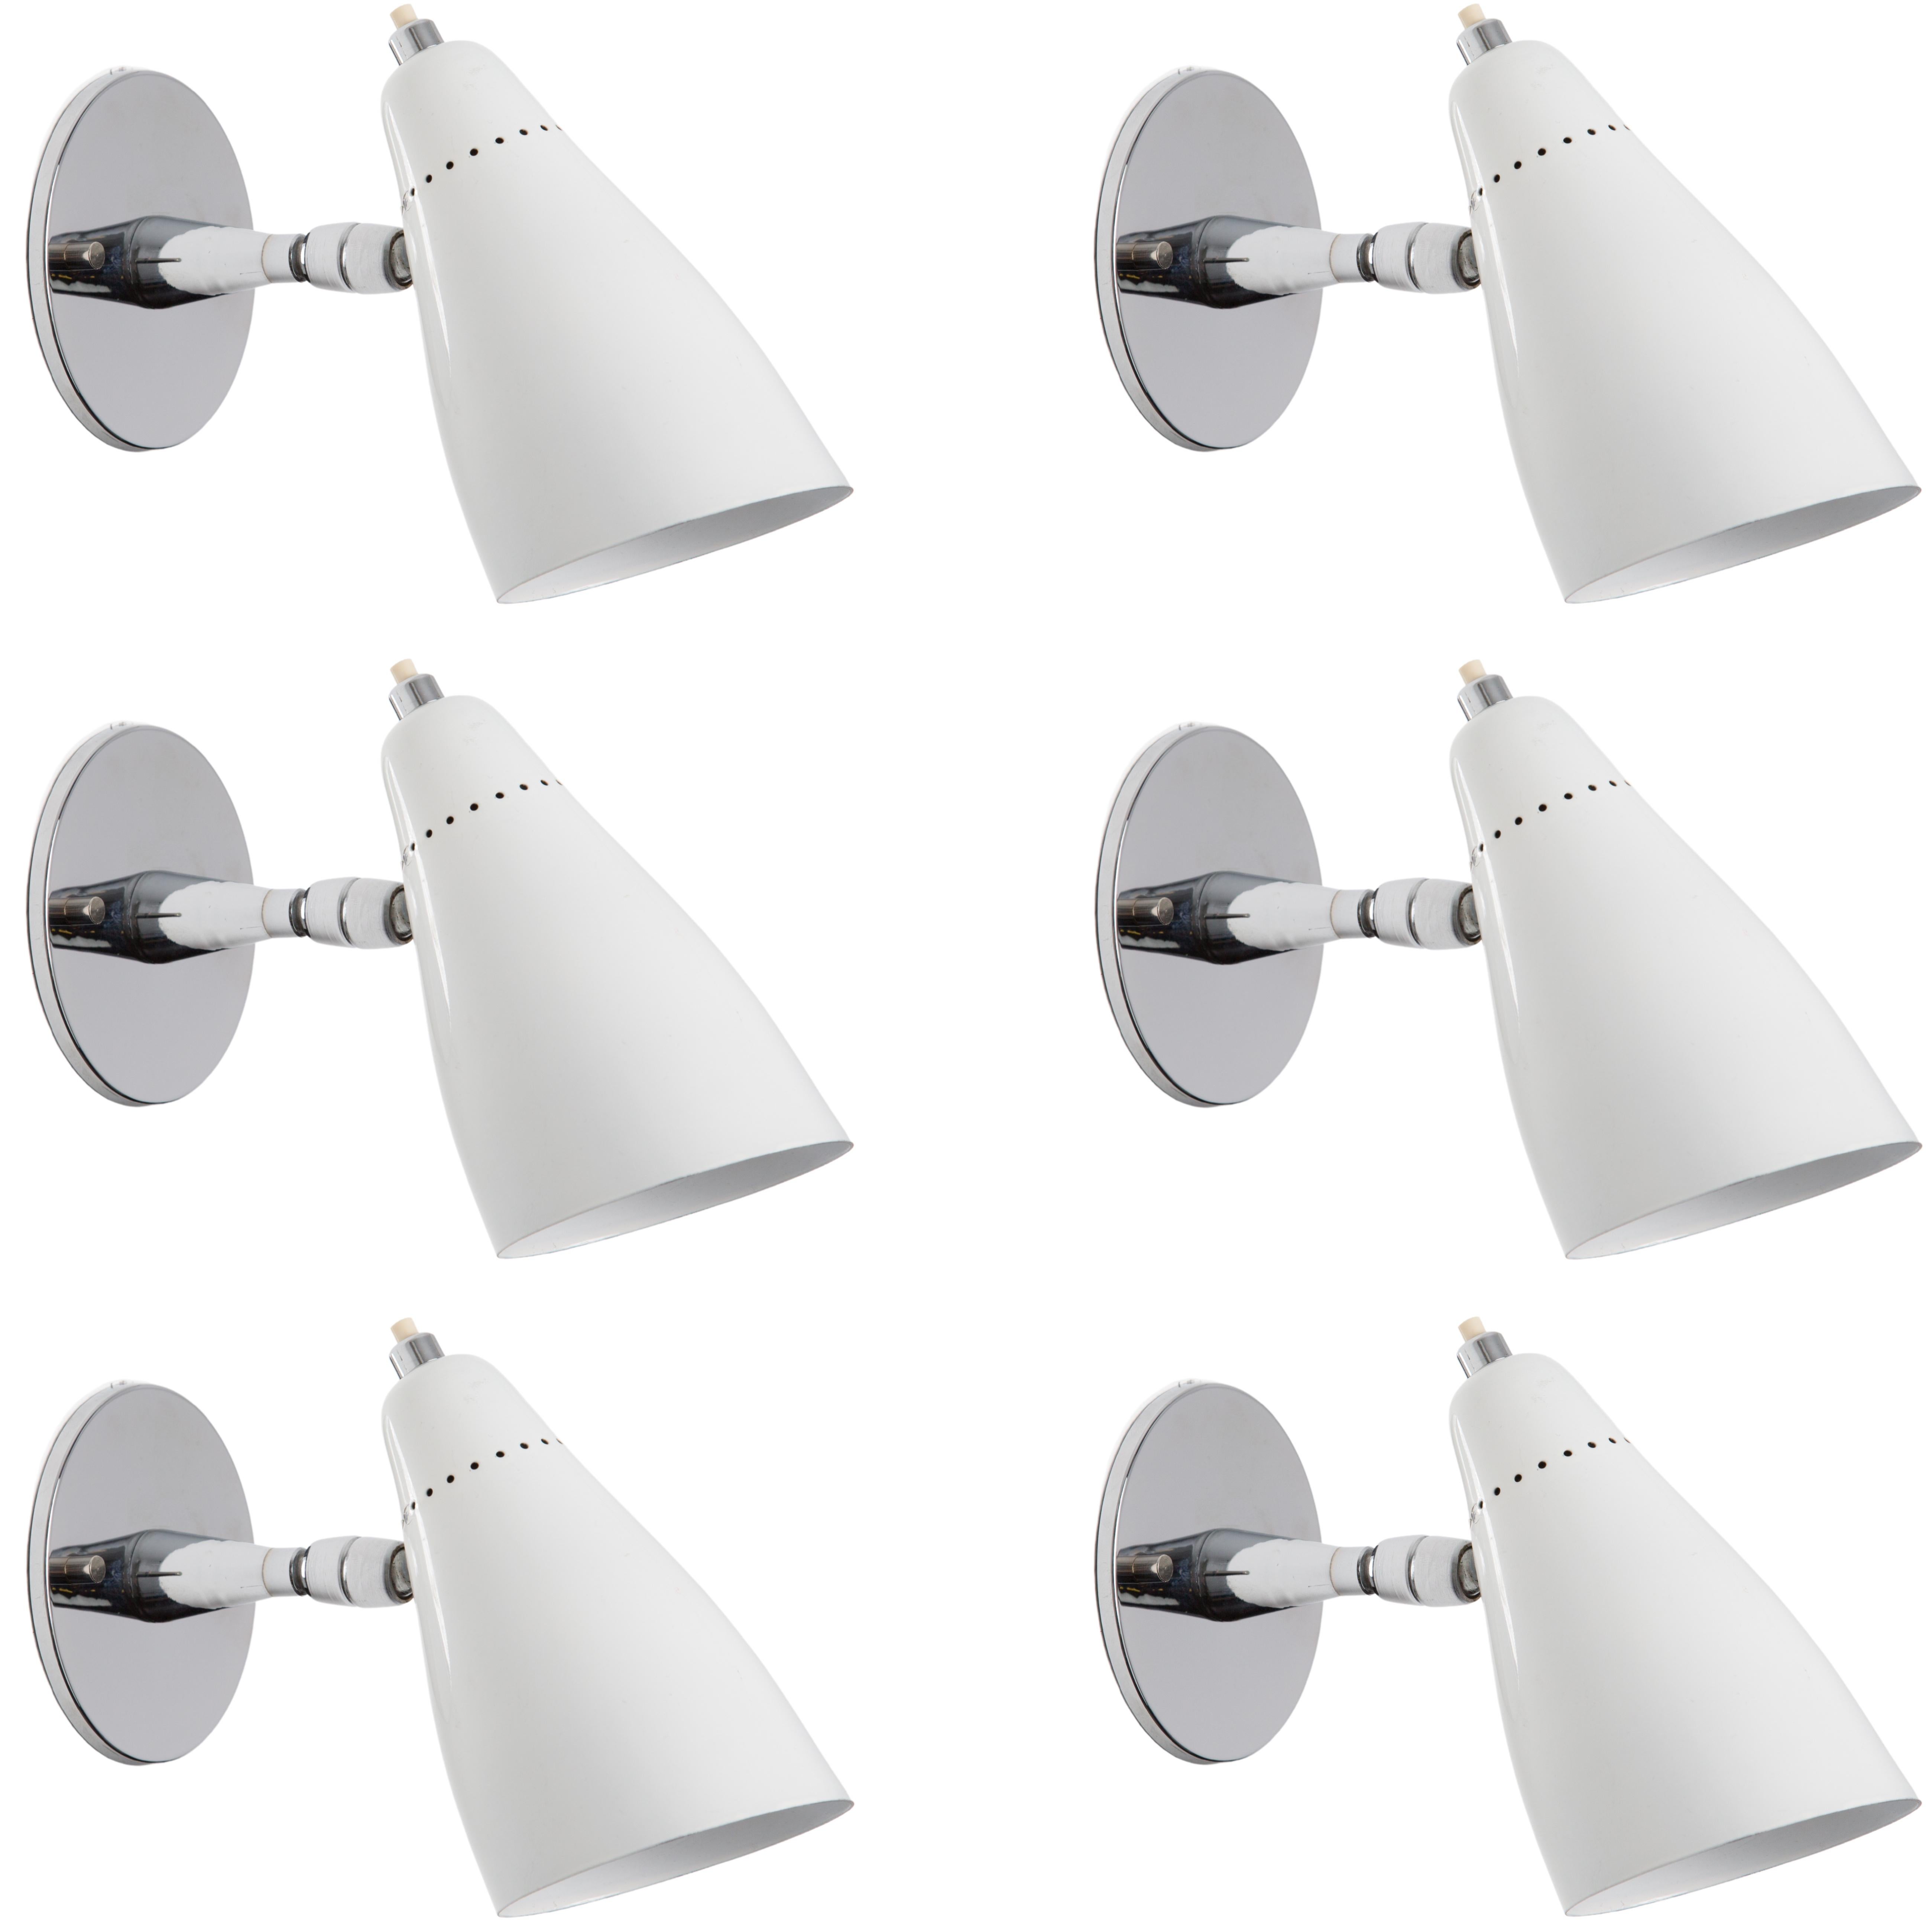 Pair of 1960s Giuseppe Ostuni Model #101 white articulating sconces for O-Luce. Executed in polished chrome and a white painted perforated aluminum shade. Sconces pivot up/down and left/right. An incredibly clean and refined design by one of the